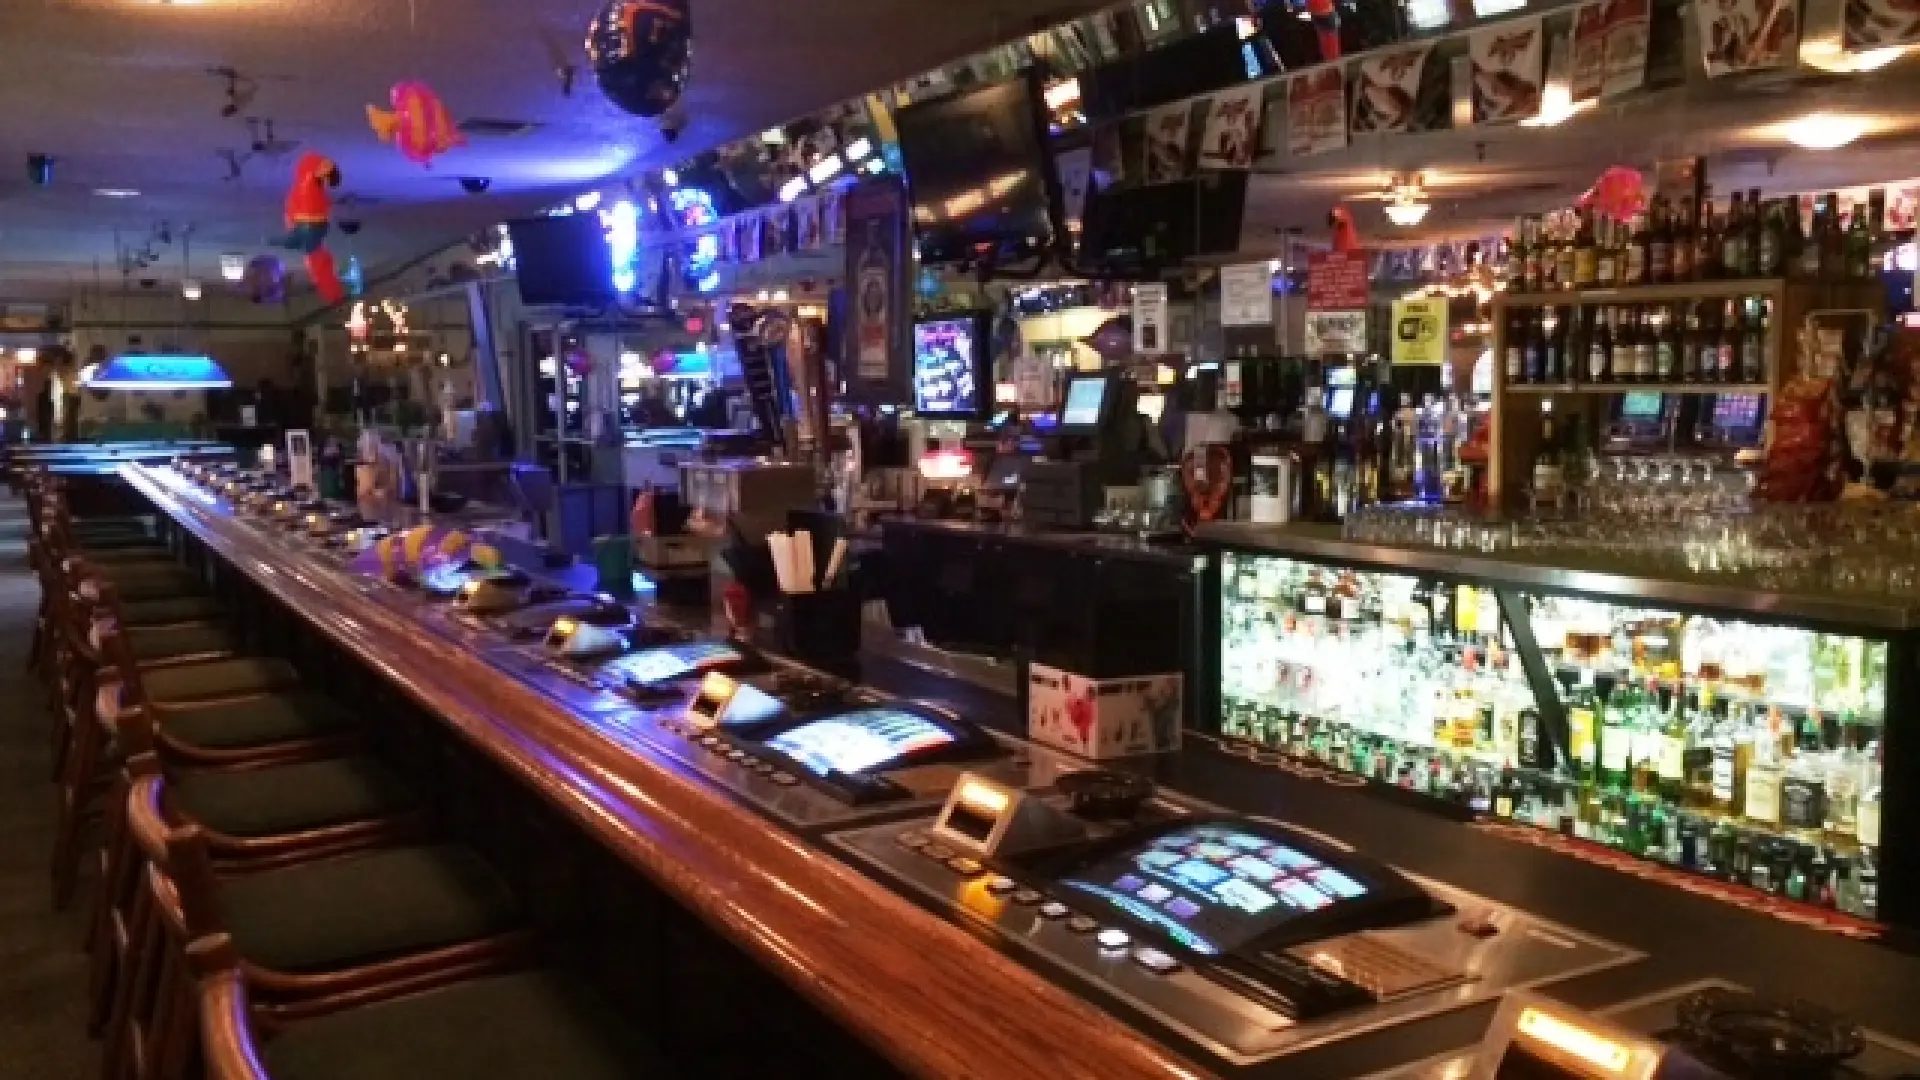 Empty, fully-stocked bar with gambling machines